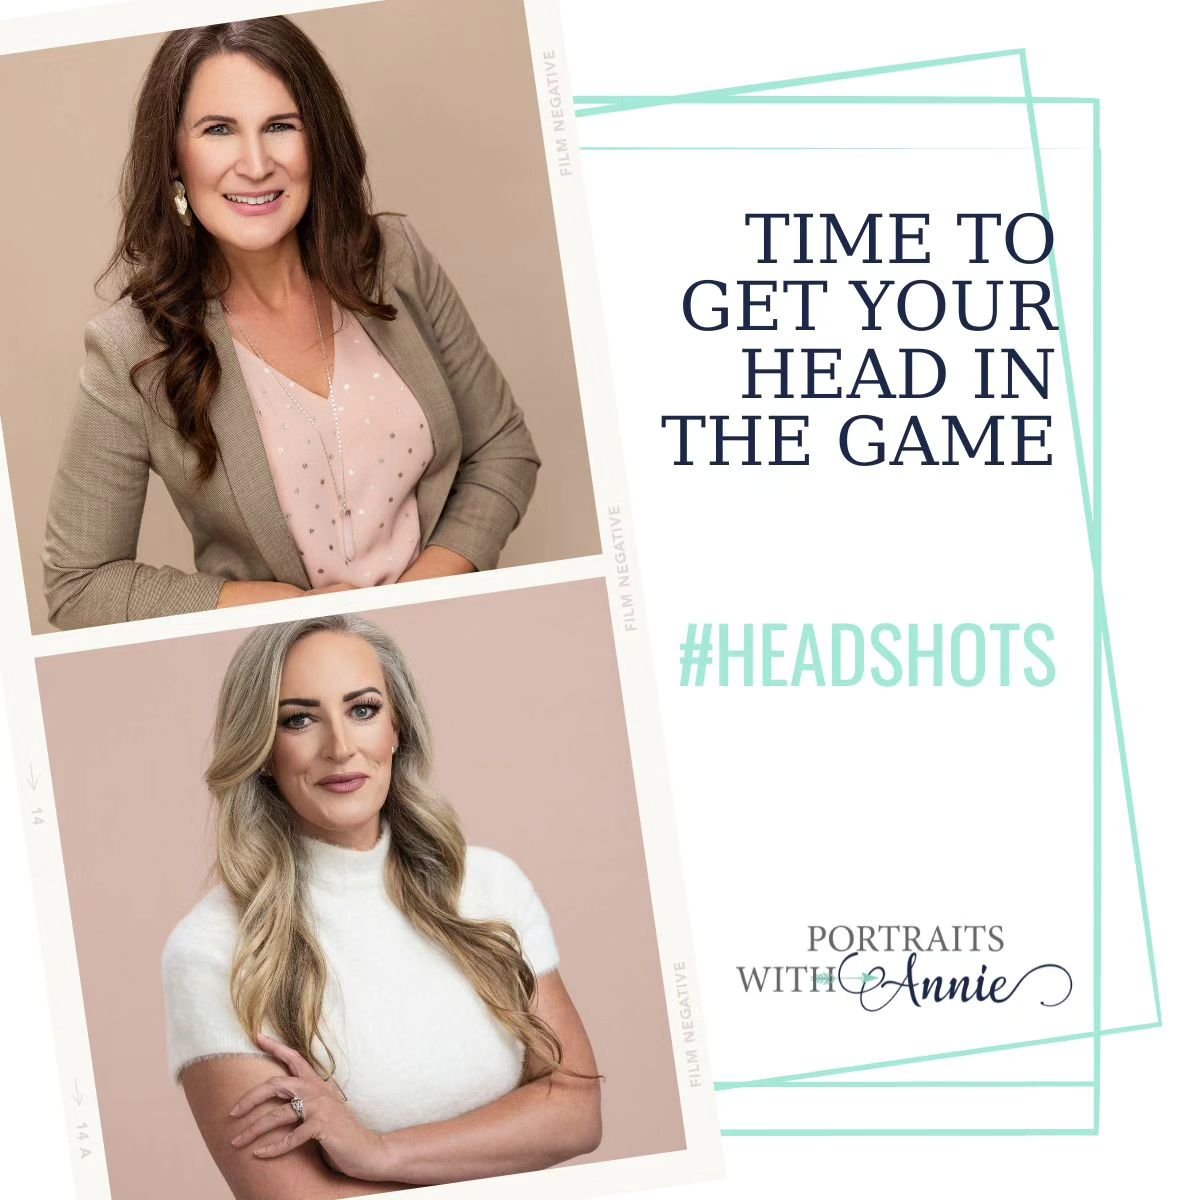 Has your head been out of the game🤦🏼? Now is the time to get that headshot you always wanted but never got around to doing.&nbsp;&nbsp;

Nothing says epic fail like a picture you tried to take of yourself in the car or the super old headshot you ho